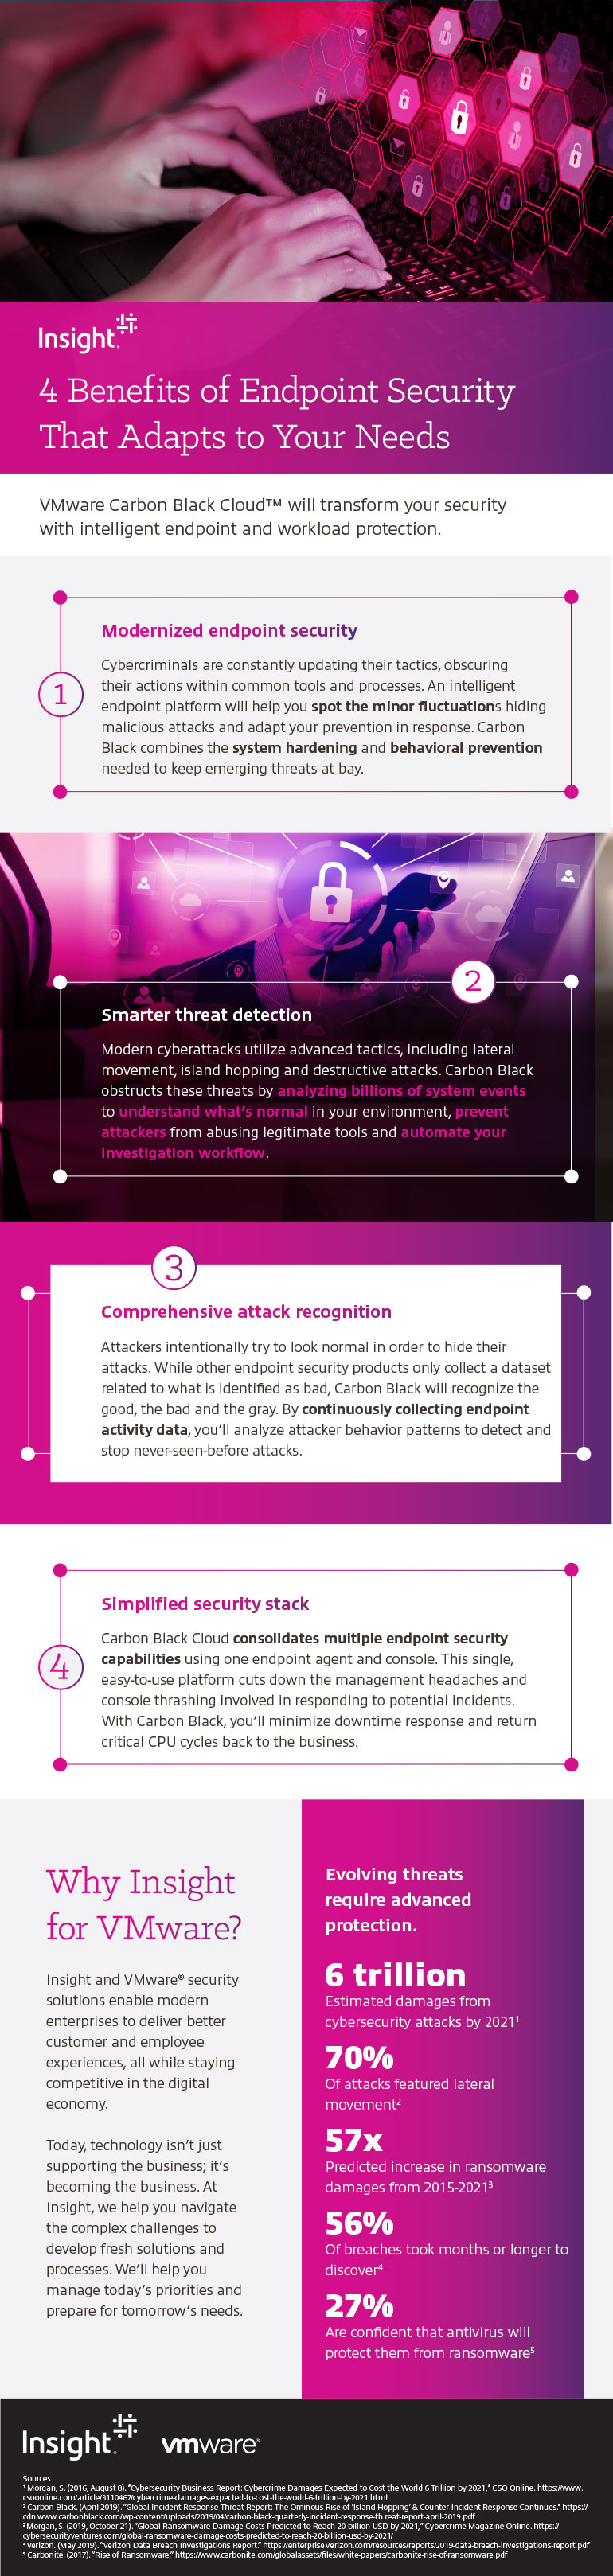 4 Benefits of Endpoint Security That Adapts to Your Needs infographic